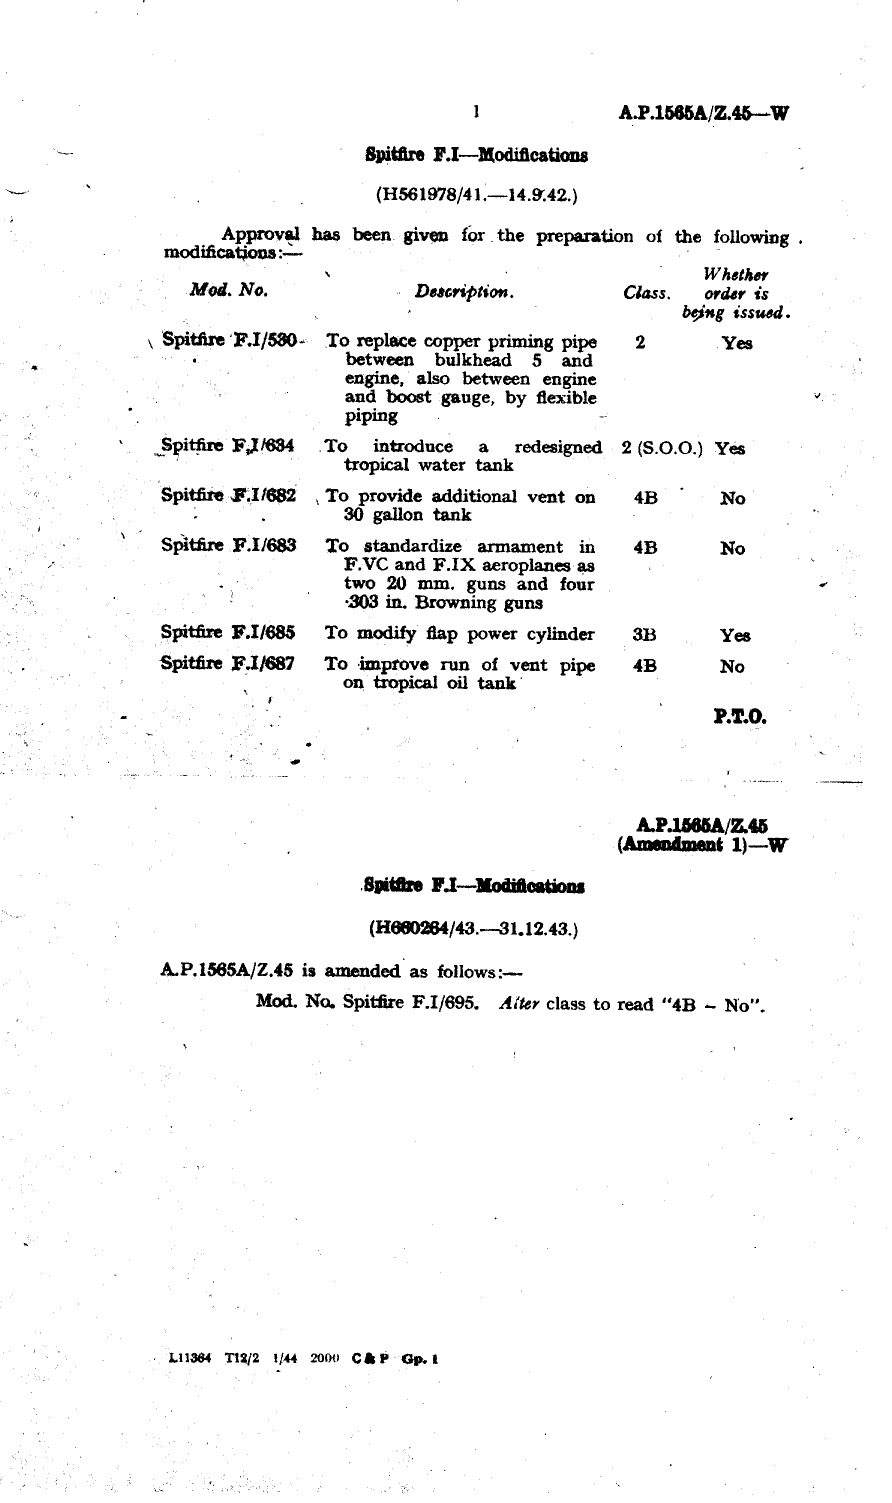 Sample page 1 from AirCorps Library document: Spitfire F.I Modifications 530, 634, 682, 683, 685, and 687